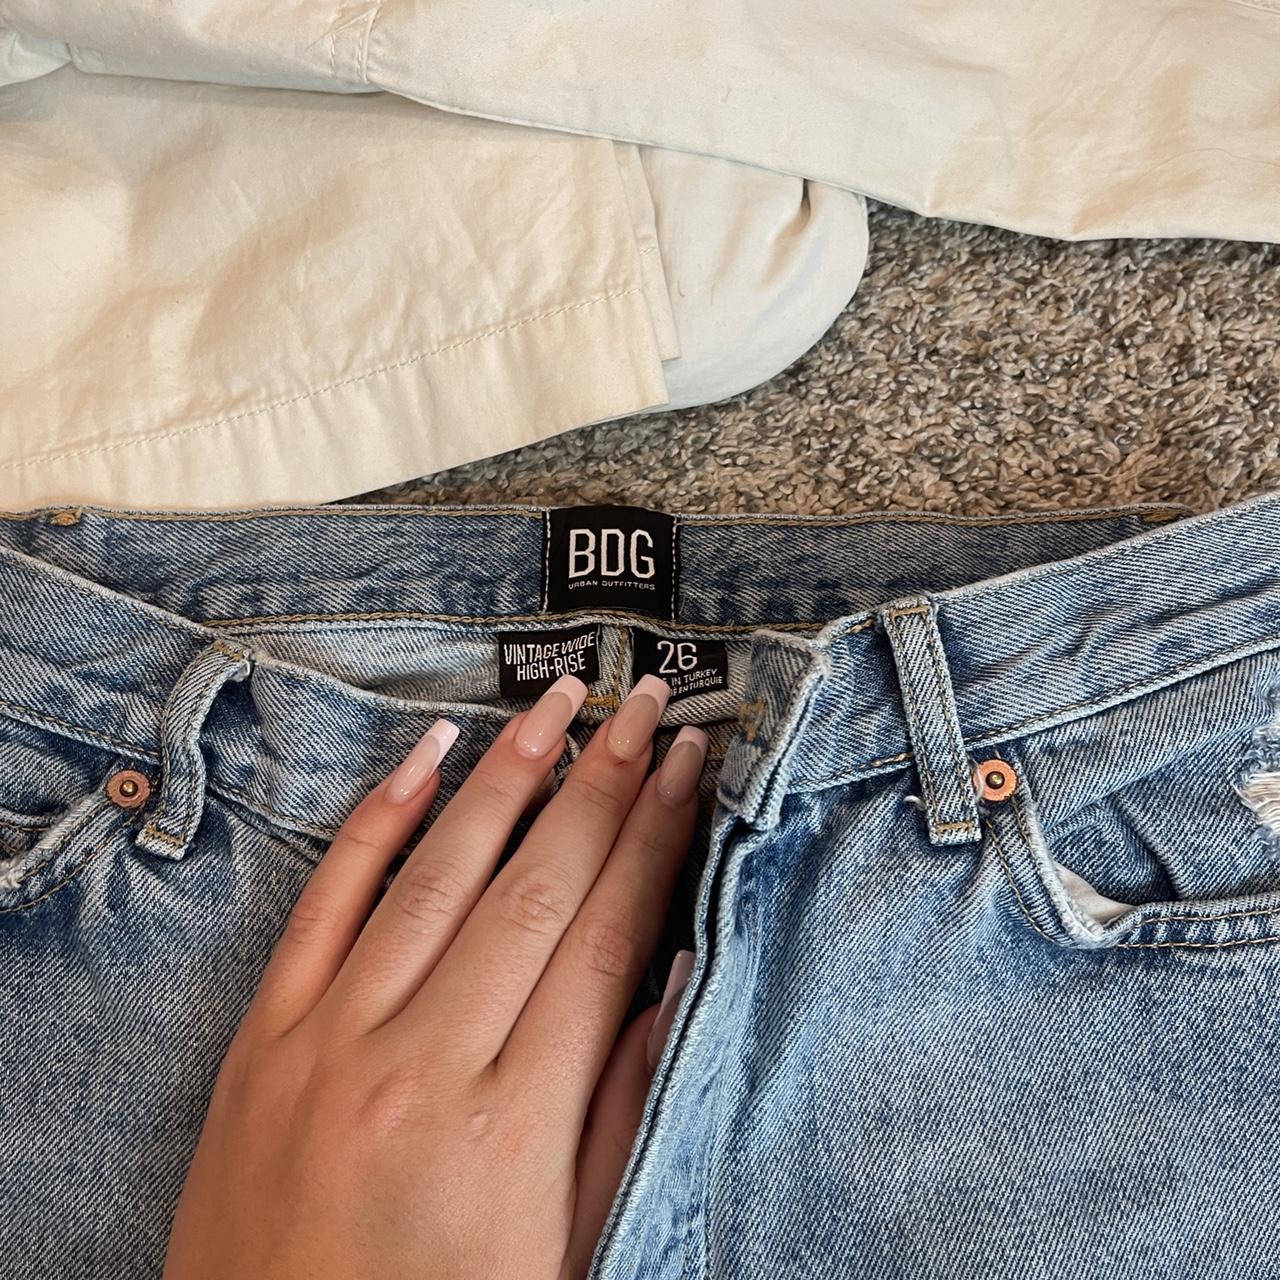 cutest urban jeans, they are sooo flattering and fit... - Depop